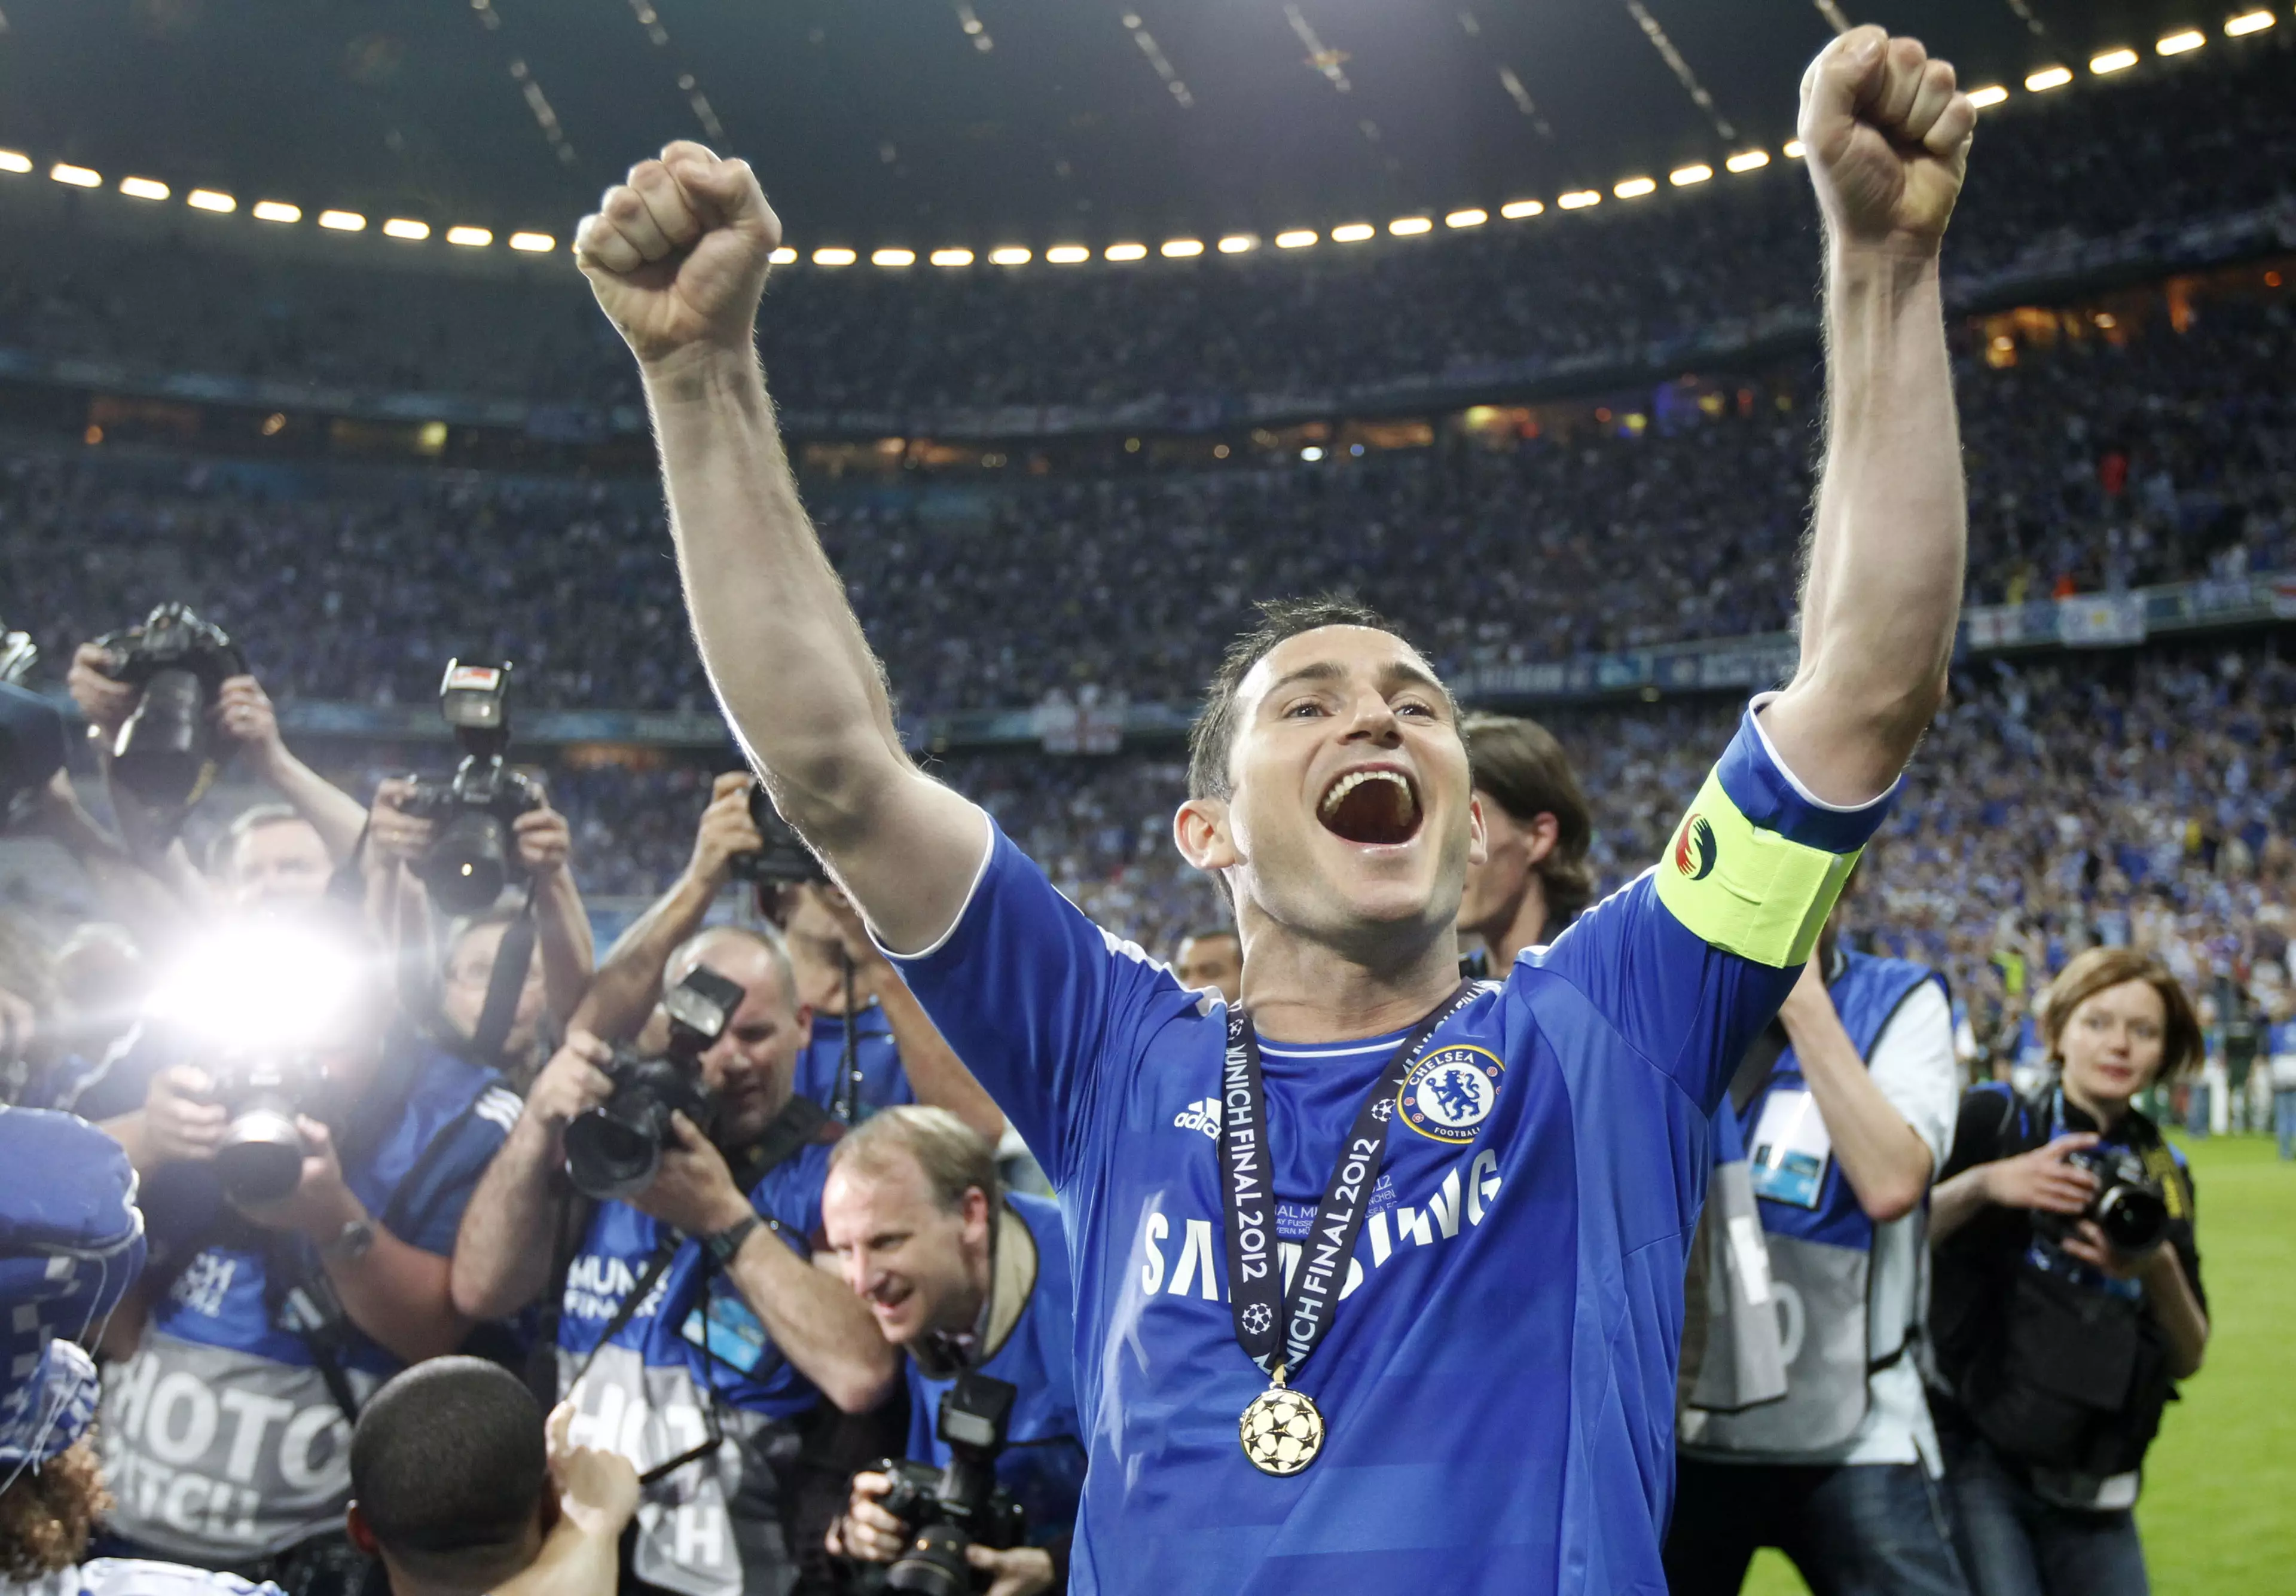 Lampard has been voted the club's greatest player. Image: PA Images